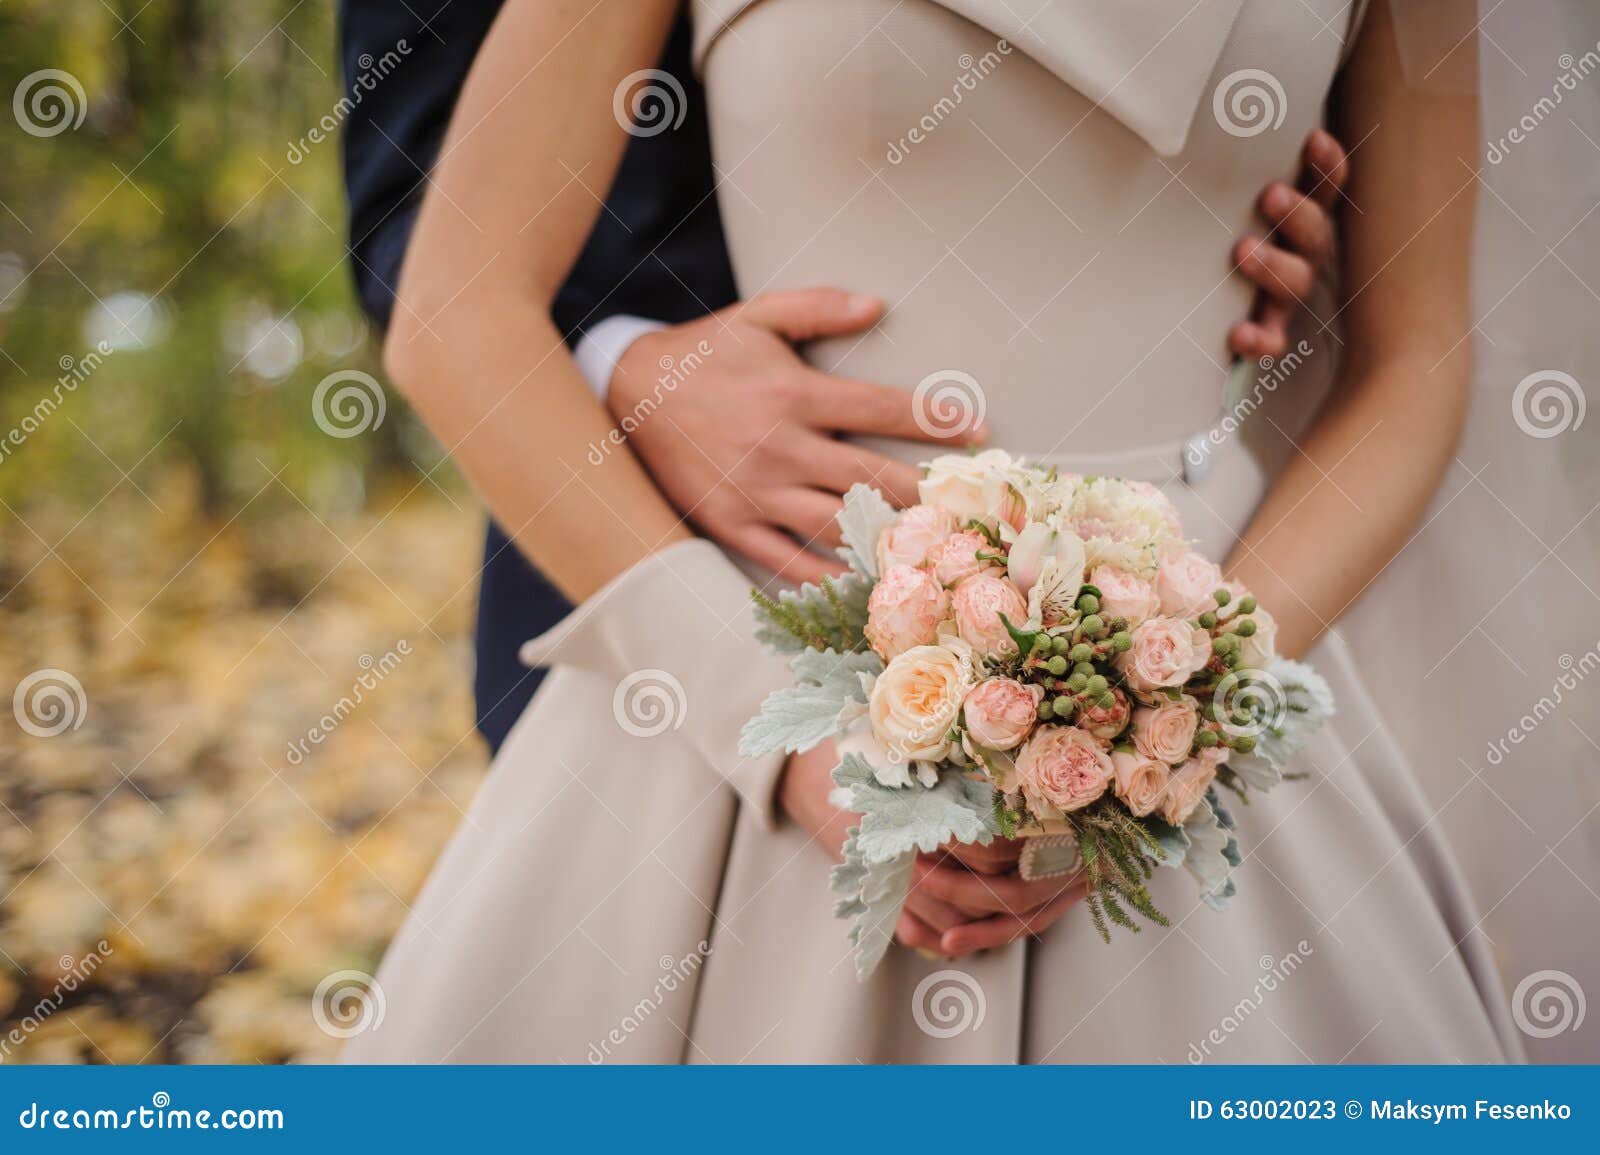 Bride and Groom Holding Bouquet Stock Image - Image of beautiful ...